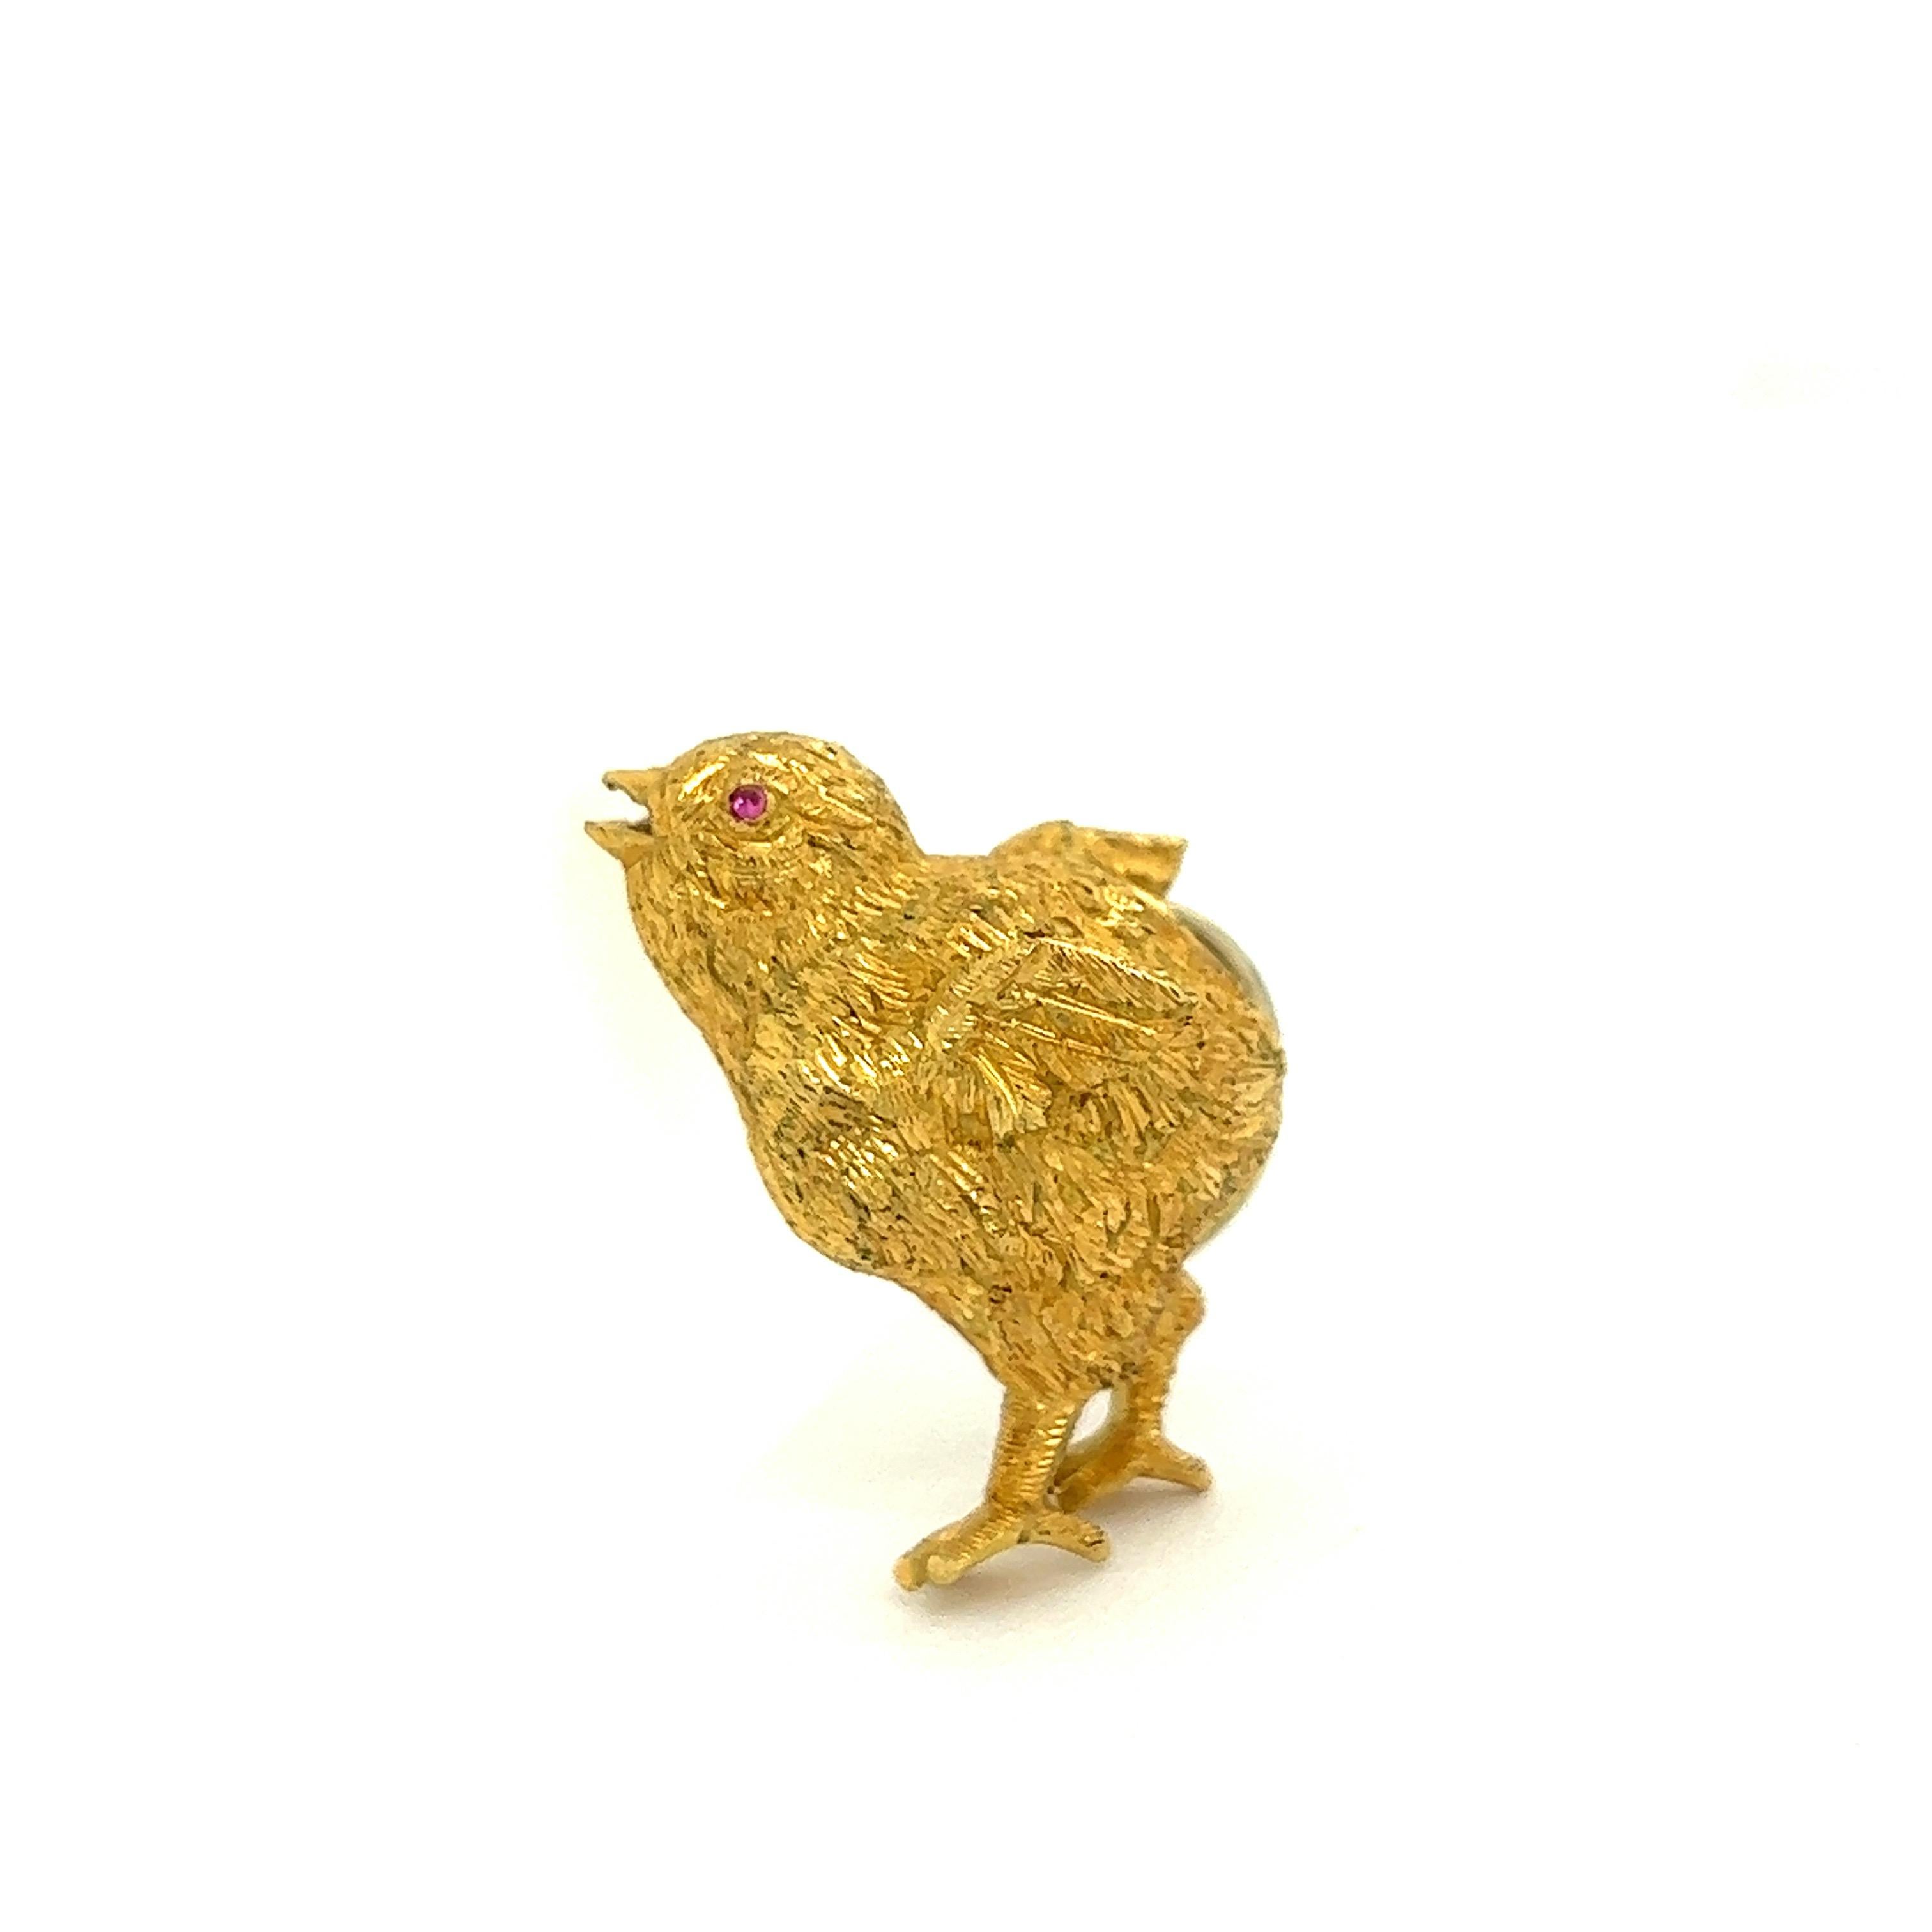 Van Cleef & Arpels Bird Lapel Pin, Italian

18 karat yellow gold, with a textured small bird motif and a spiral back; marked VCA, 18k, Made in Italy, 750

Size: width 1.5 cm, length 2.5 cm
Total weight: 6.5 grams 